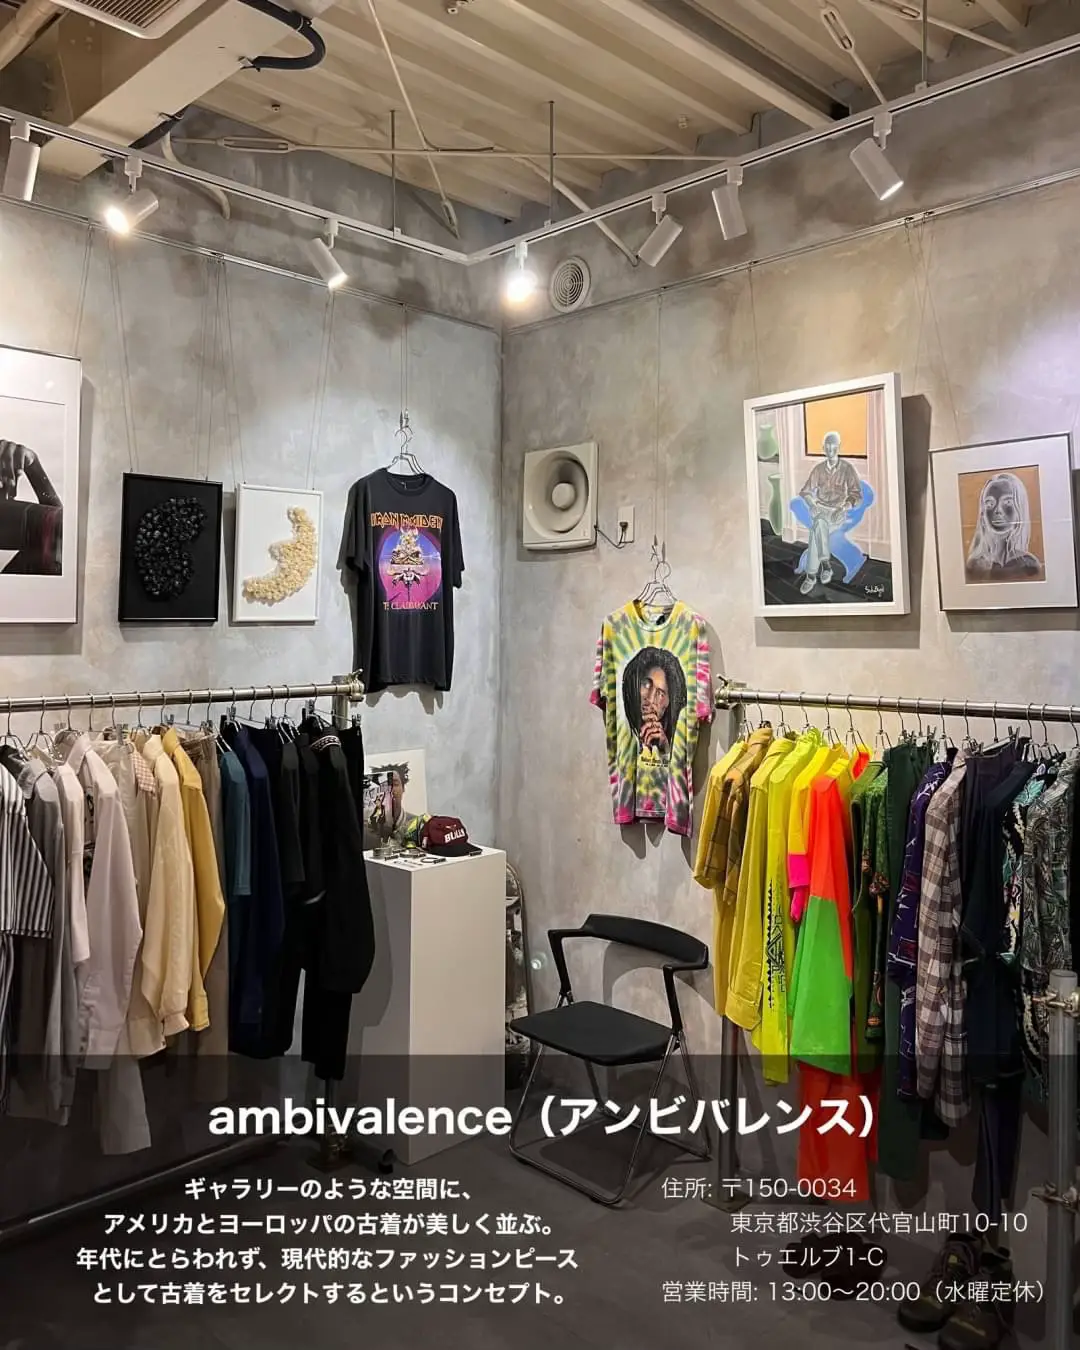 5 Used Clothing Stores in Daikanyama Recommended for Fashion